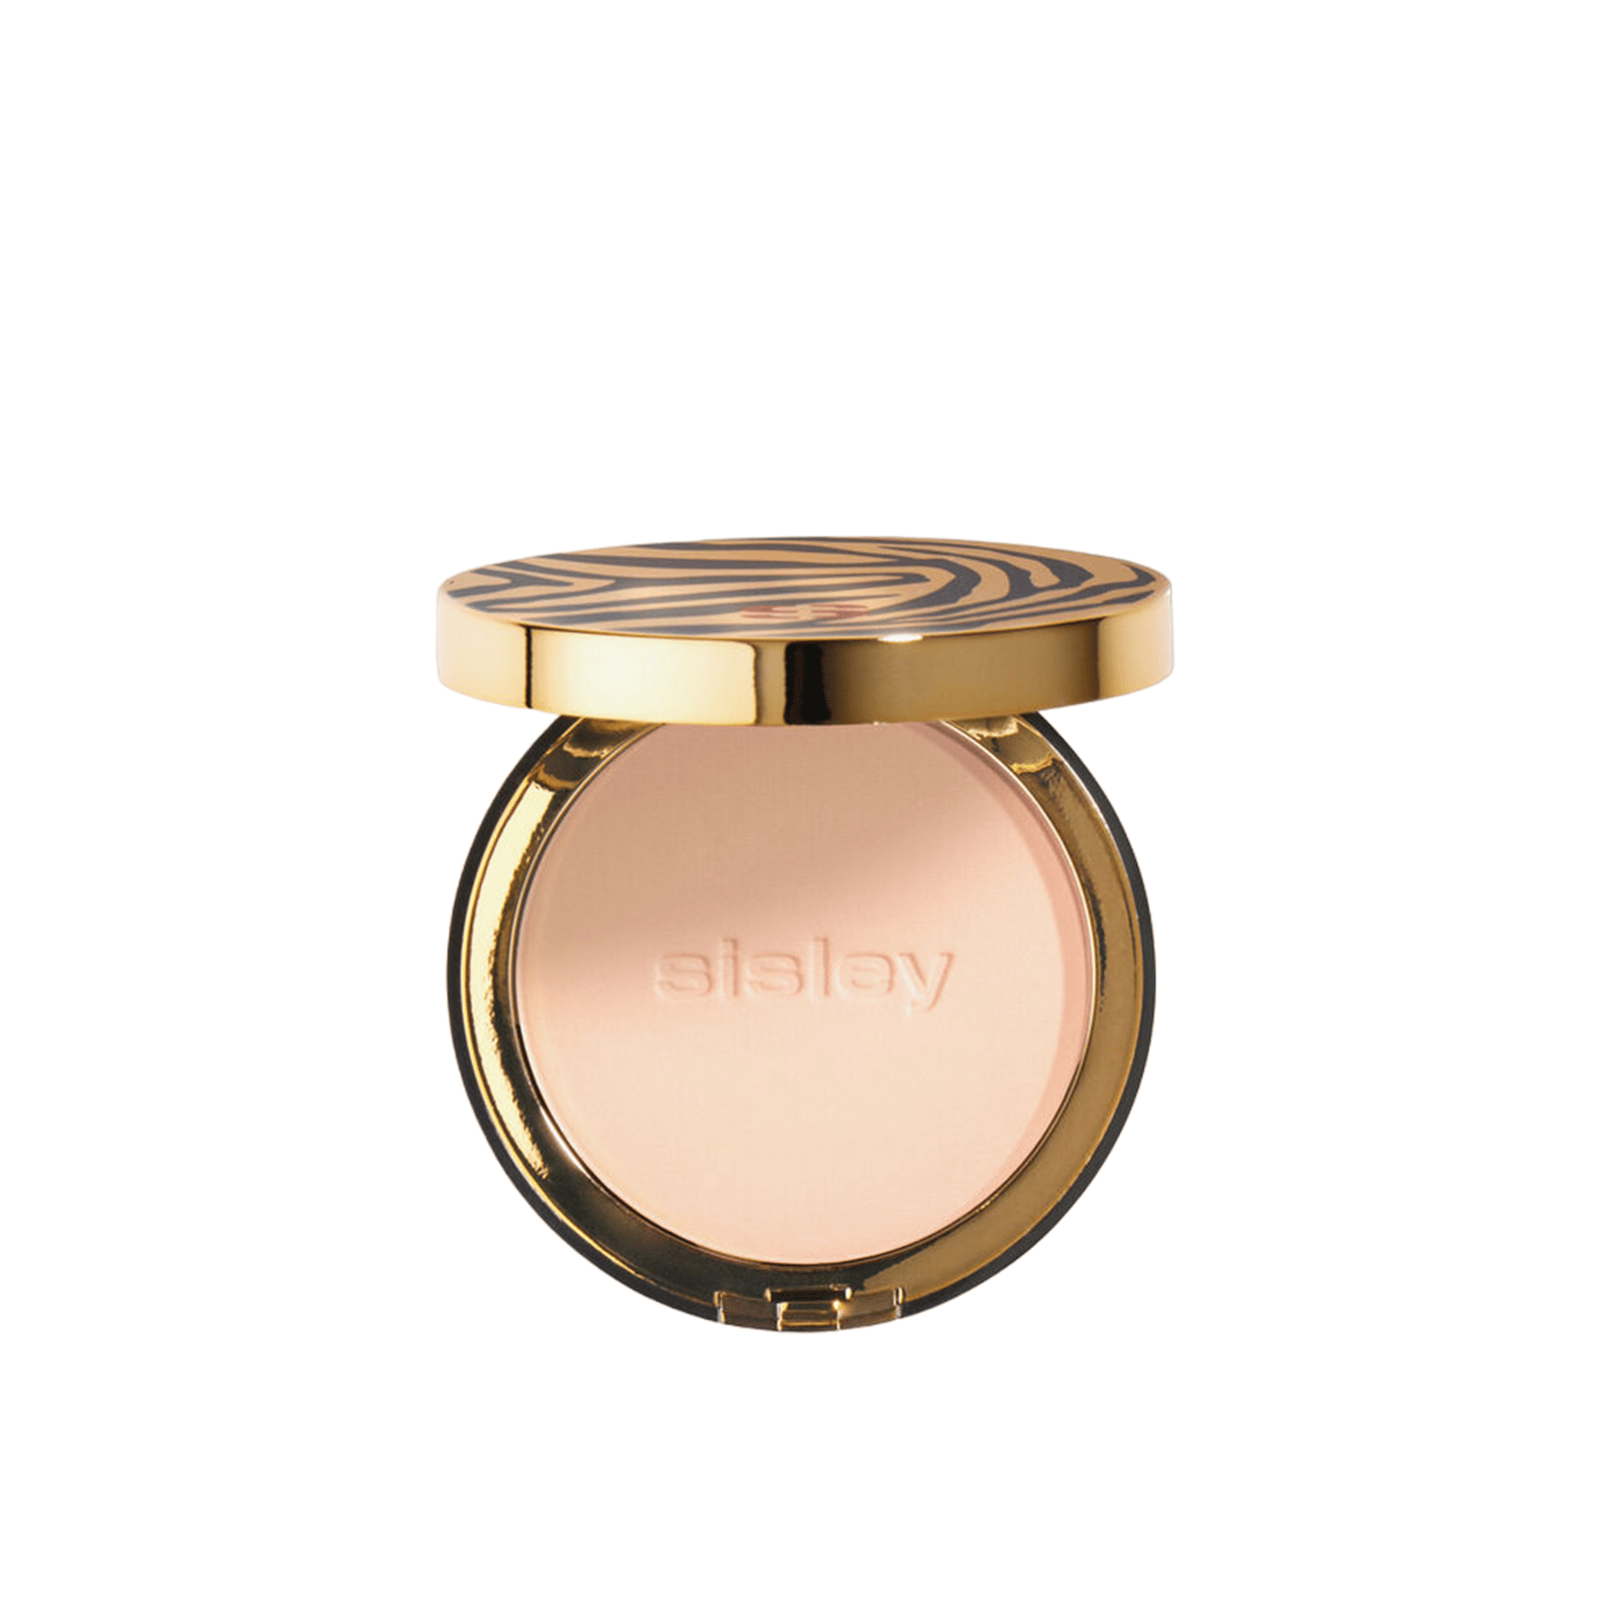 Sisley Paris Phyto-Poudre Compacte Matifying And Beautifying Pressed Powder 1 Rosy 12g (0.42 oz)